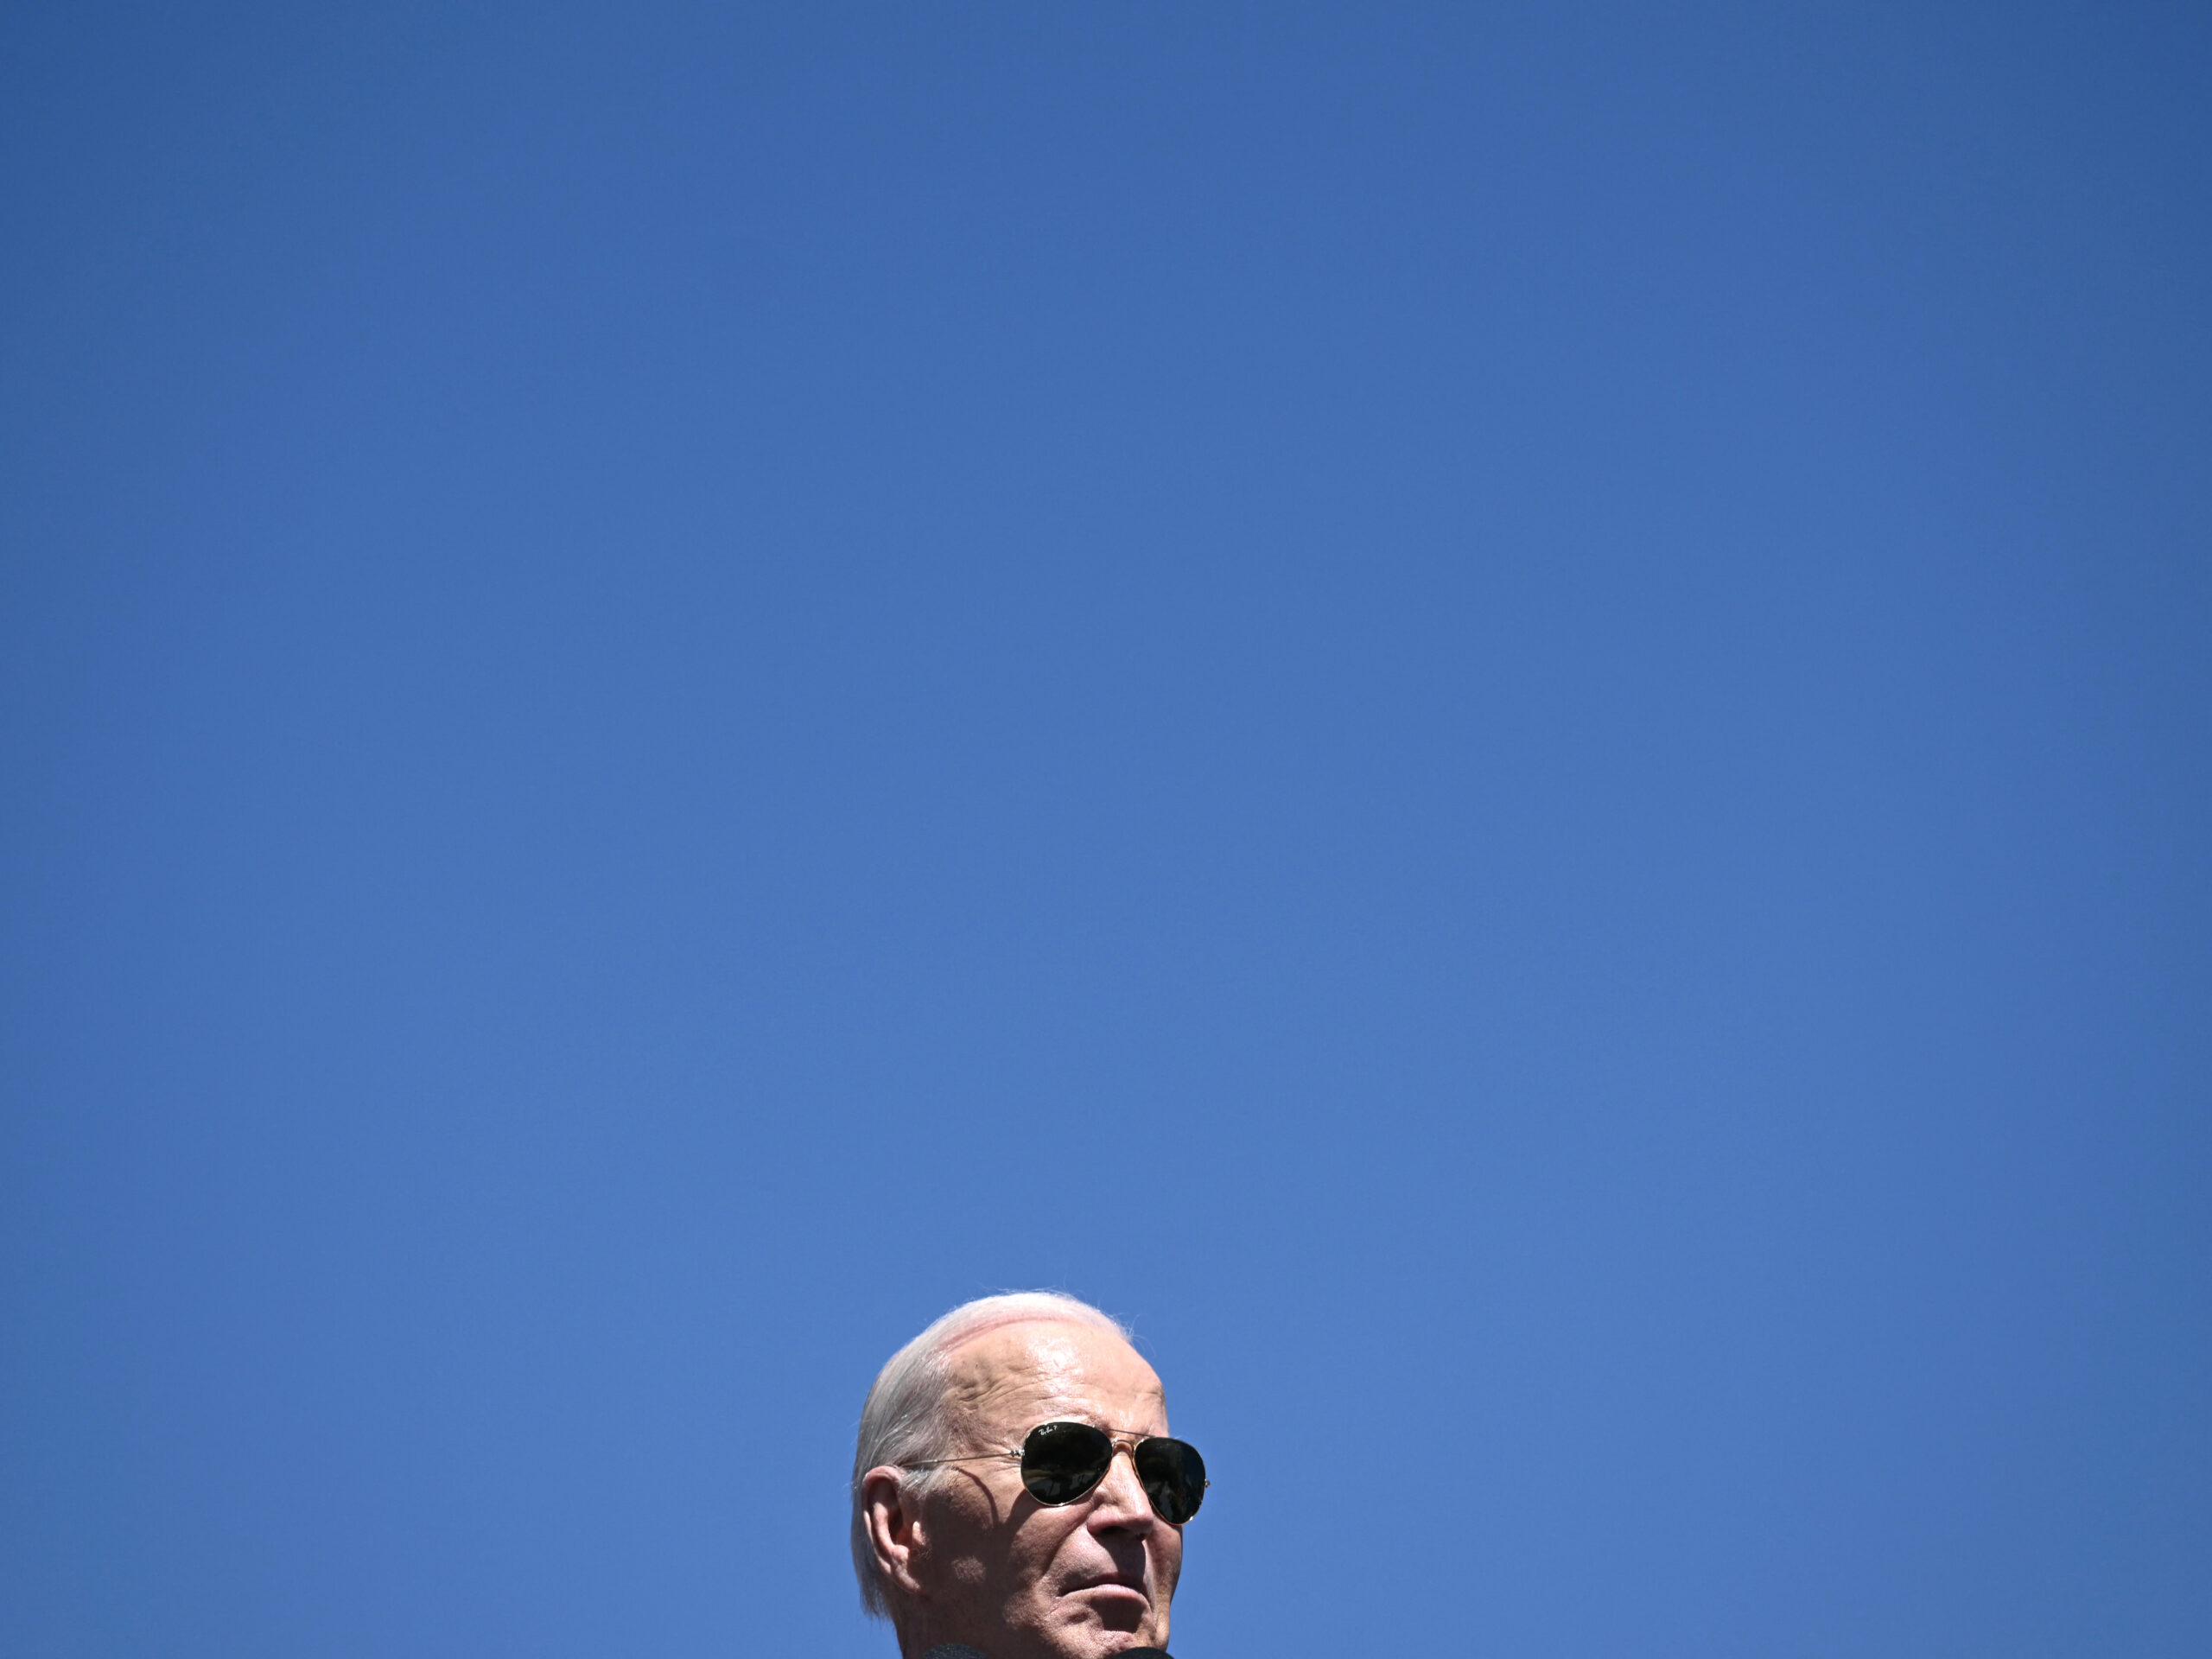 Yes, Biden is really running in November. But a lot of voters say they doubt it